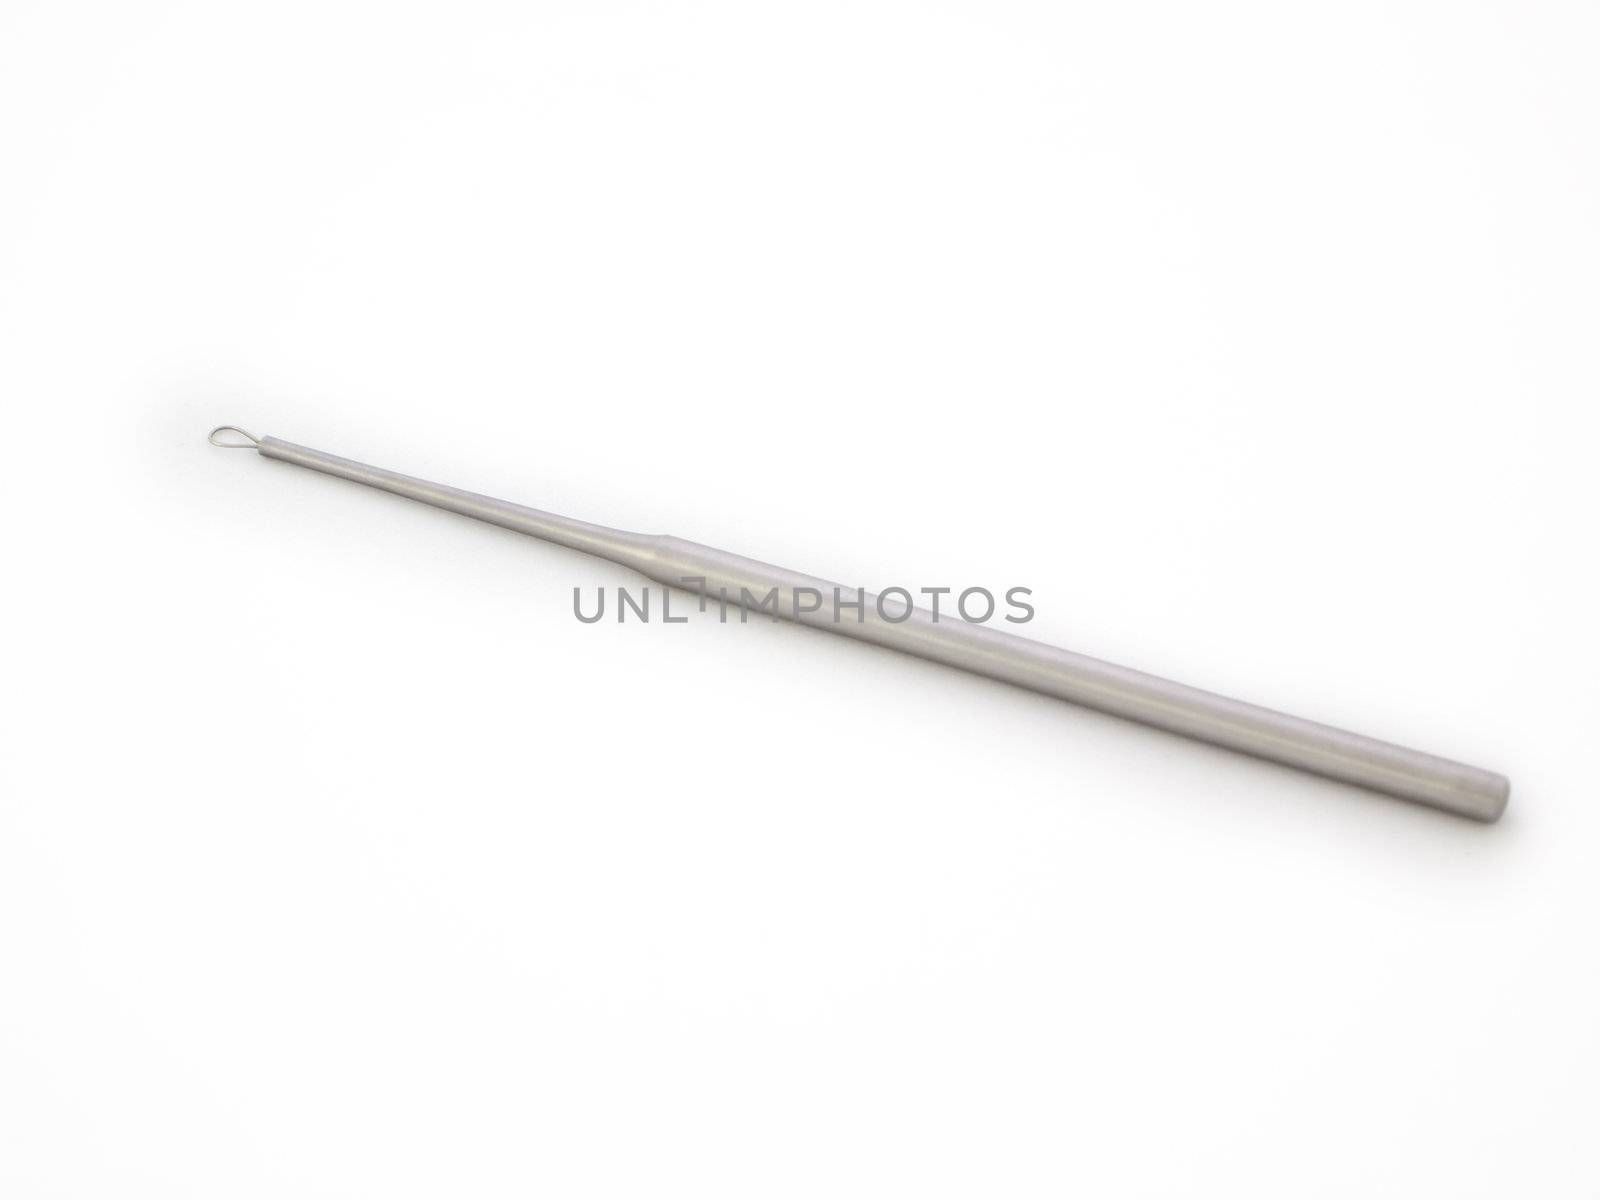 Cerumen curette isolated on a white background by pljvv